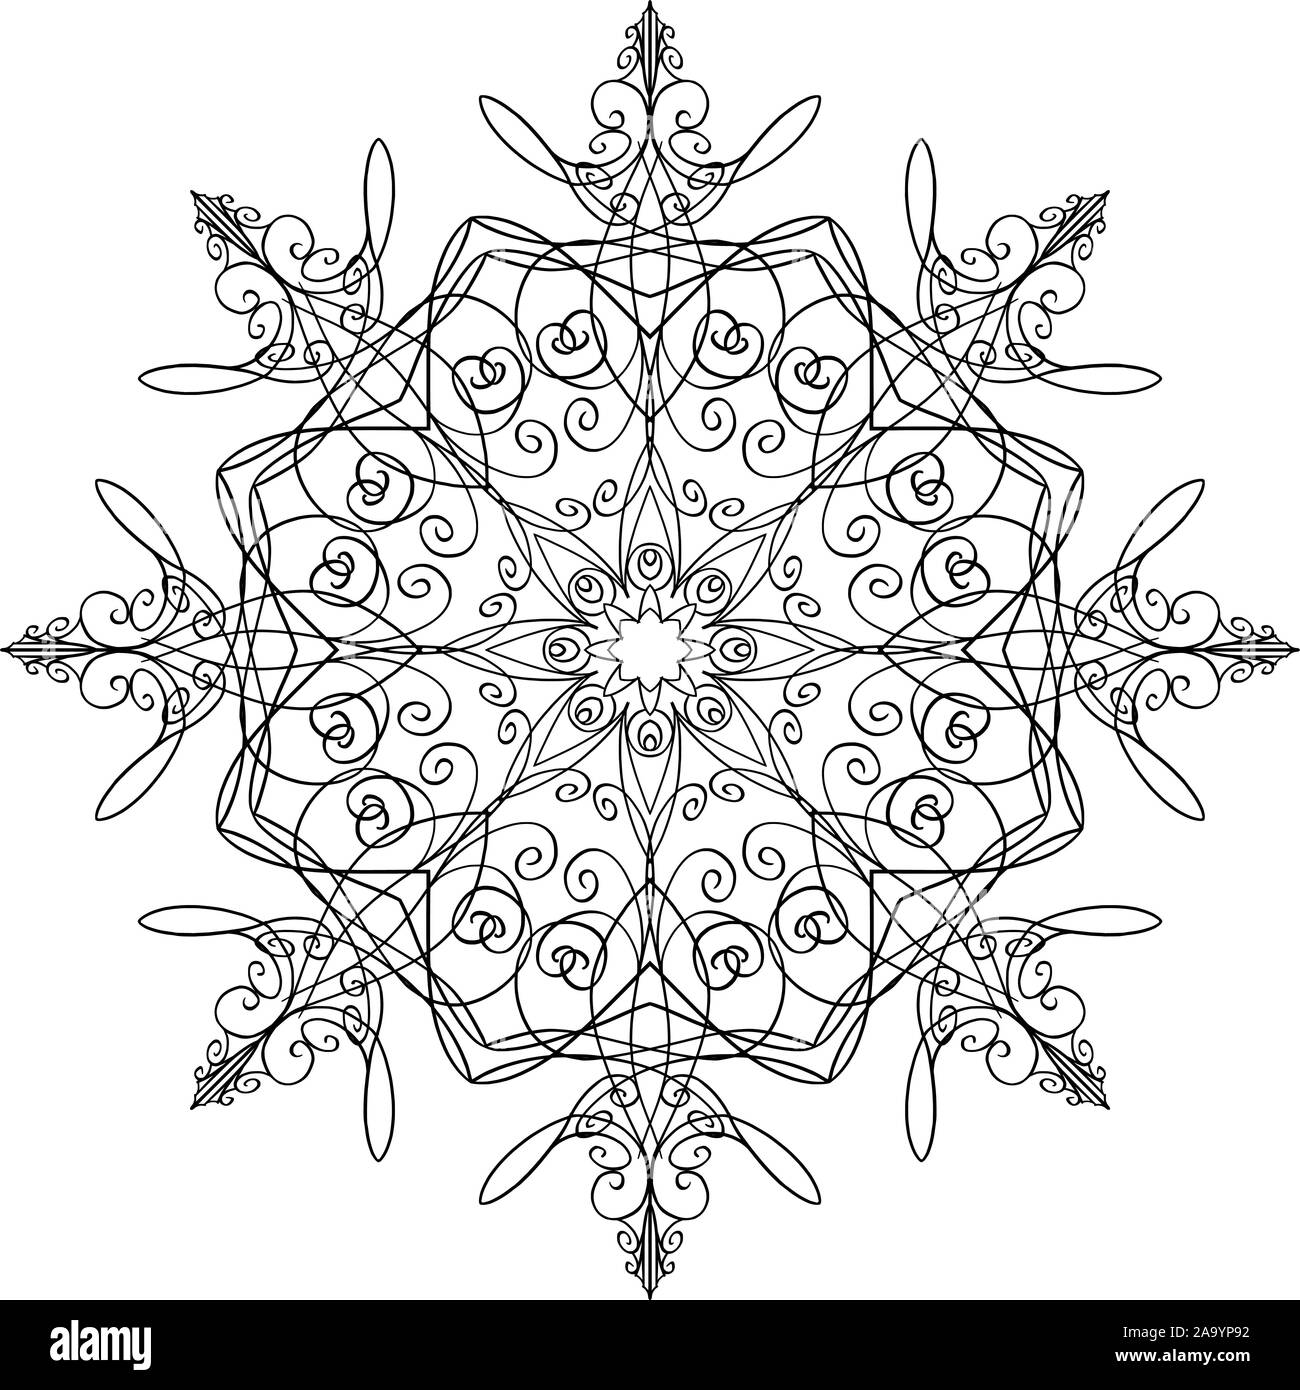 Vector pen and ink drawing of snow flake shape, round ornamental graphic design in mandala style. Stock Vector